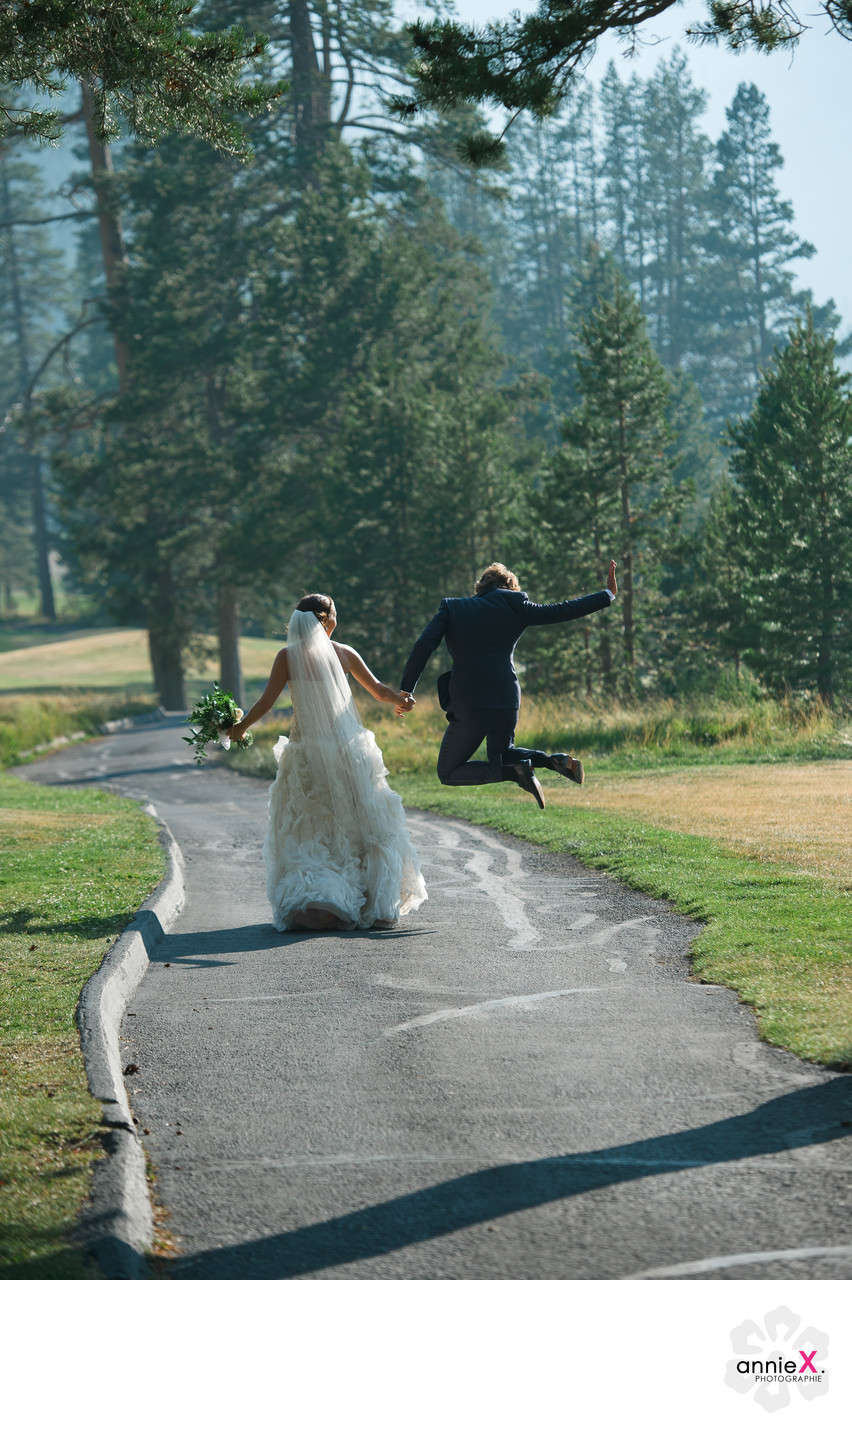 Most fun Wedding photographer in Squaw Valley
